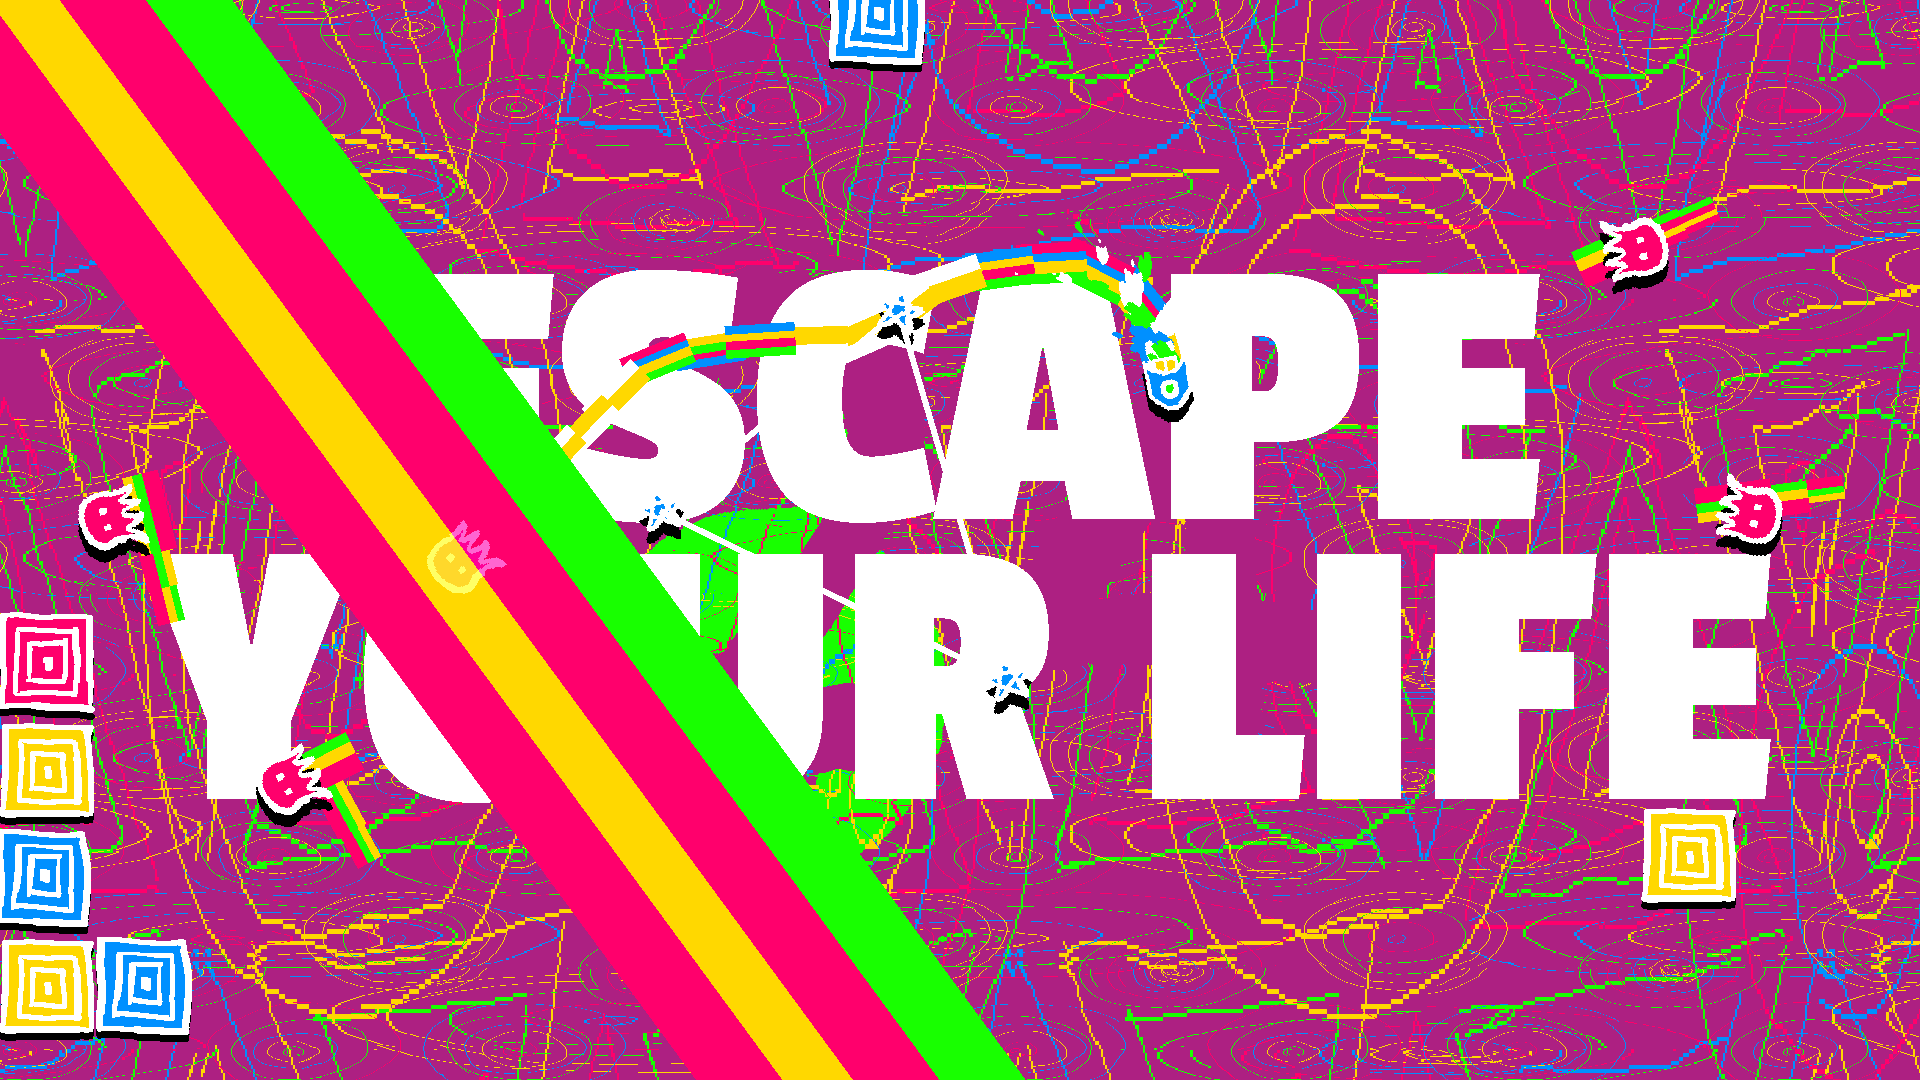 This screen reads "escape your life"